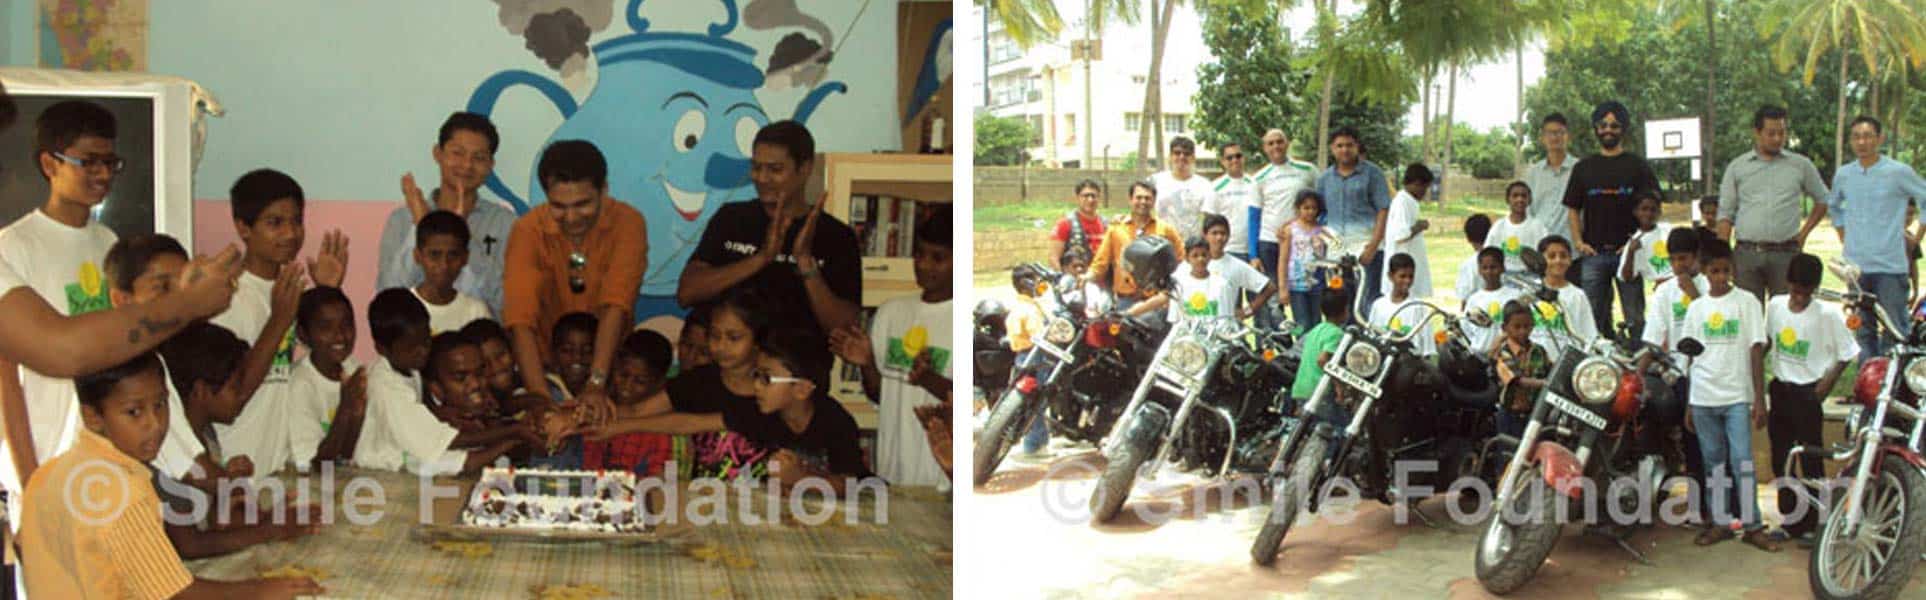 Riders Republic spend day with smile kids